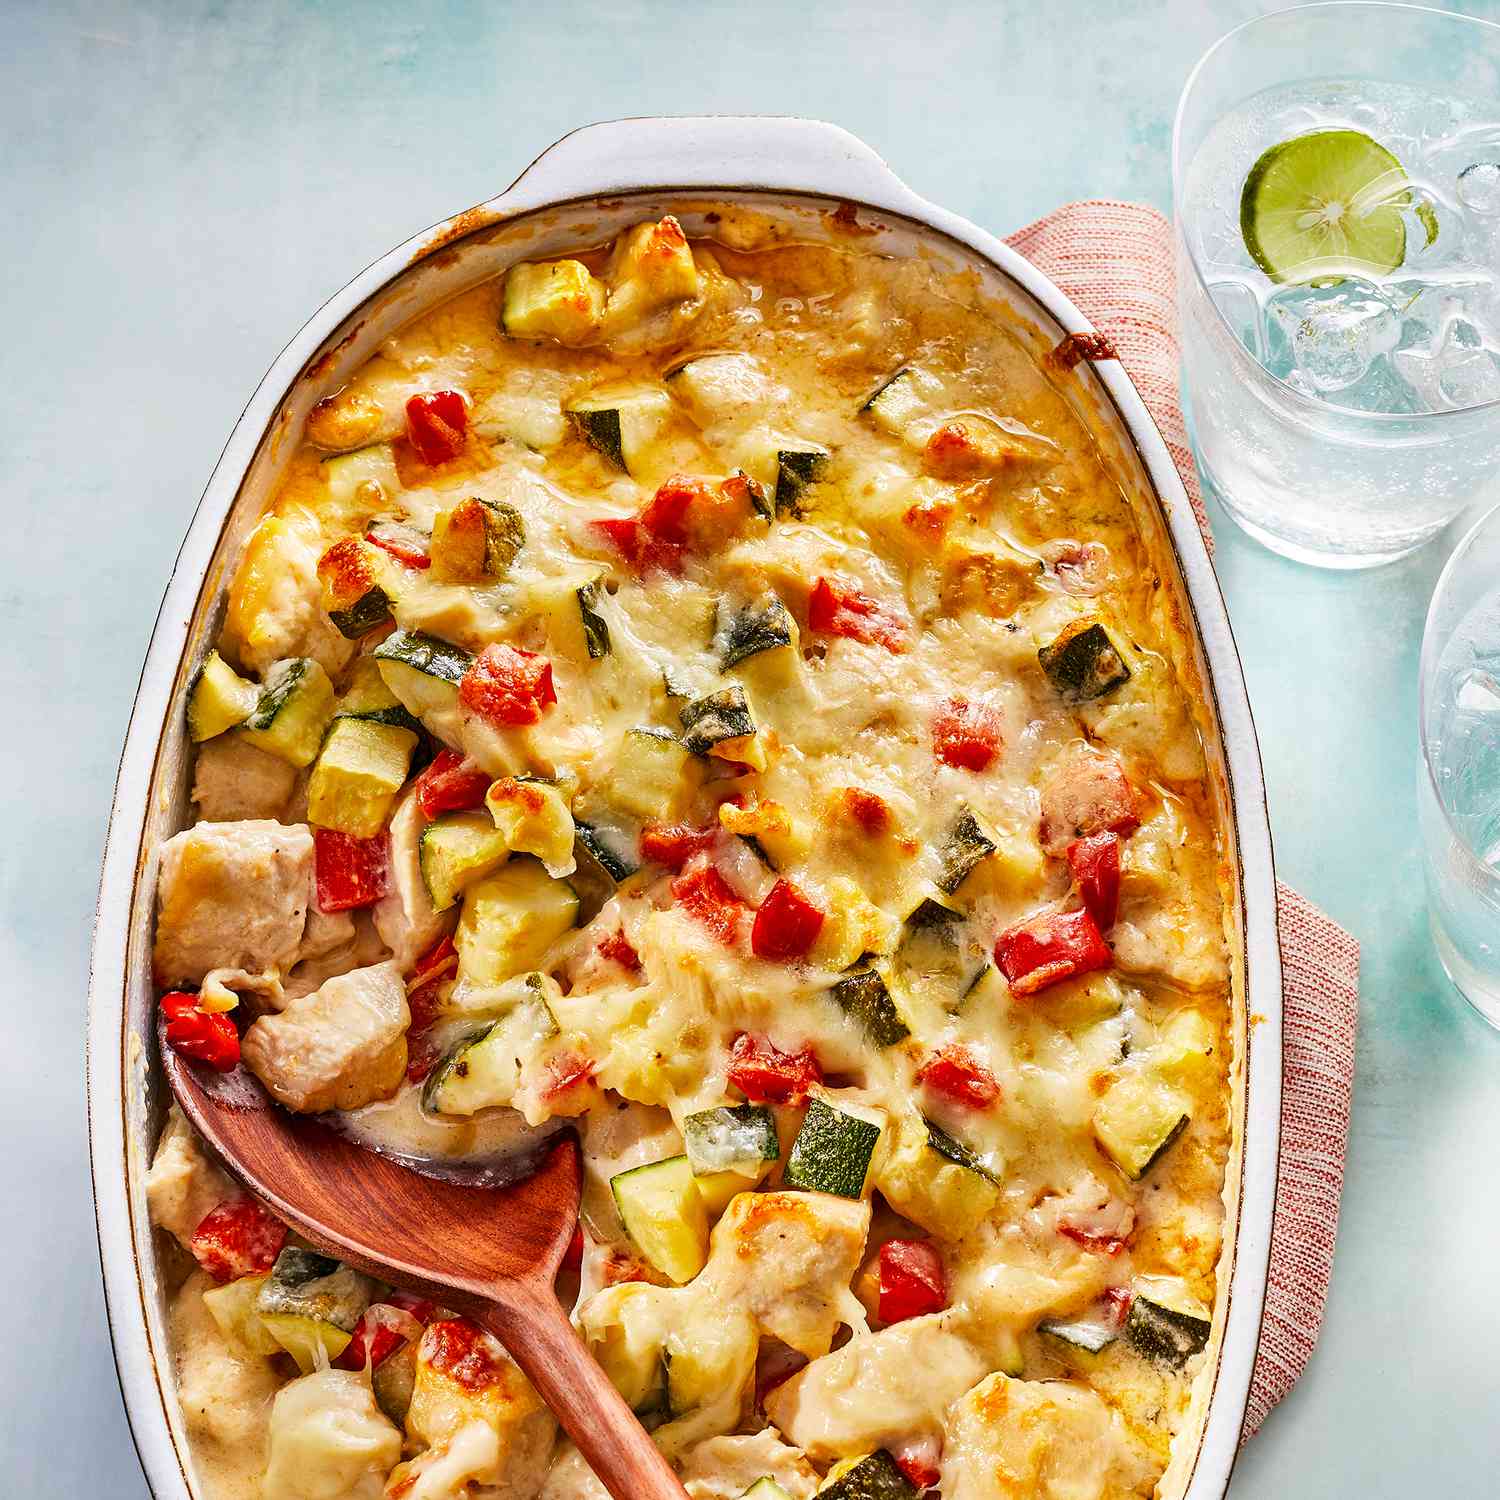 Our 20 Most Popular Casseroles of 2022